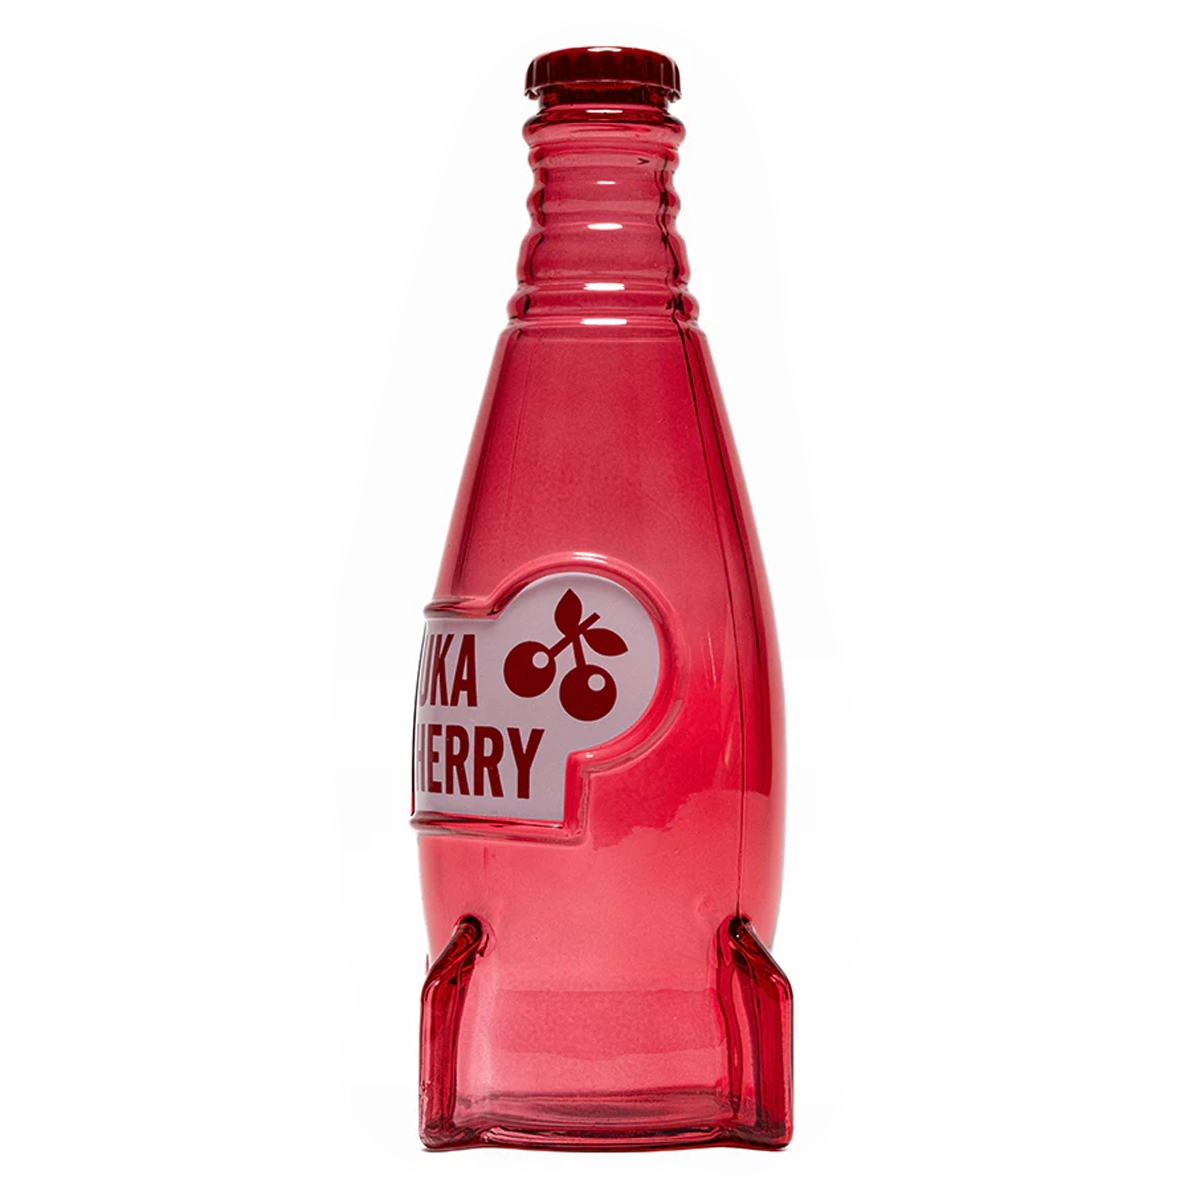 Fallout "Nuka Cola Cherry" Glass Bottle and Caps Image 5